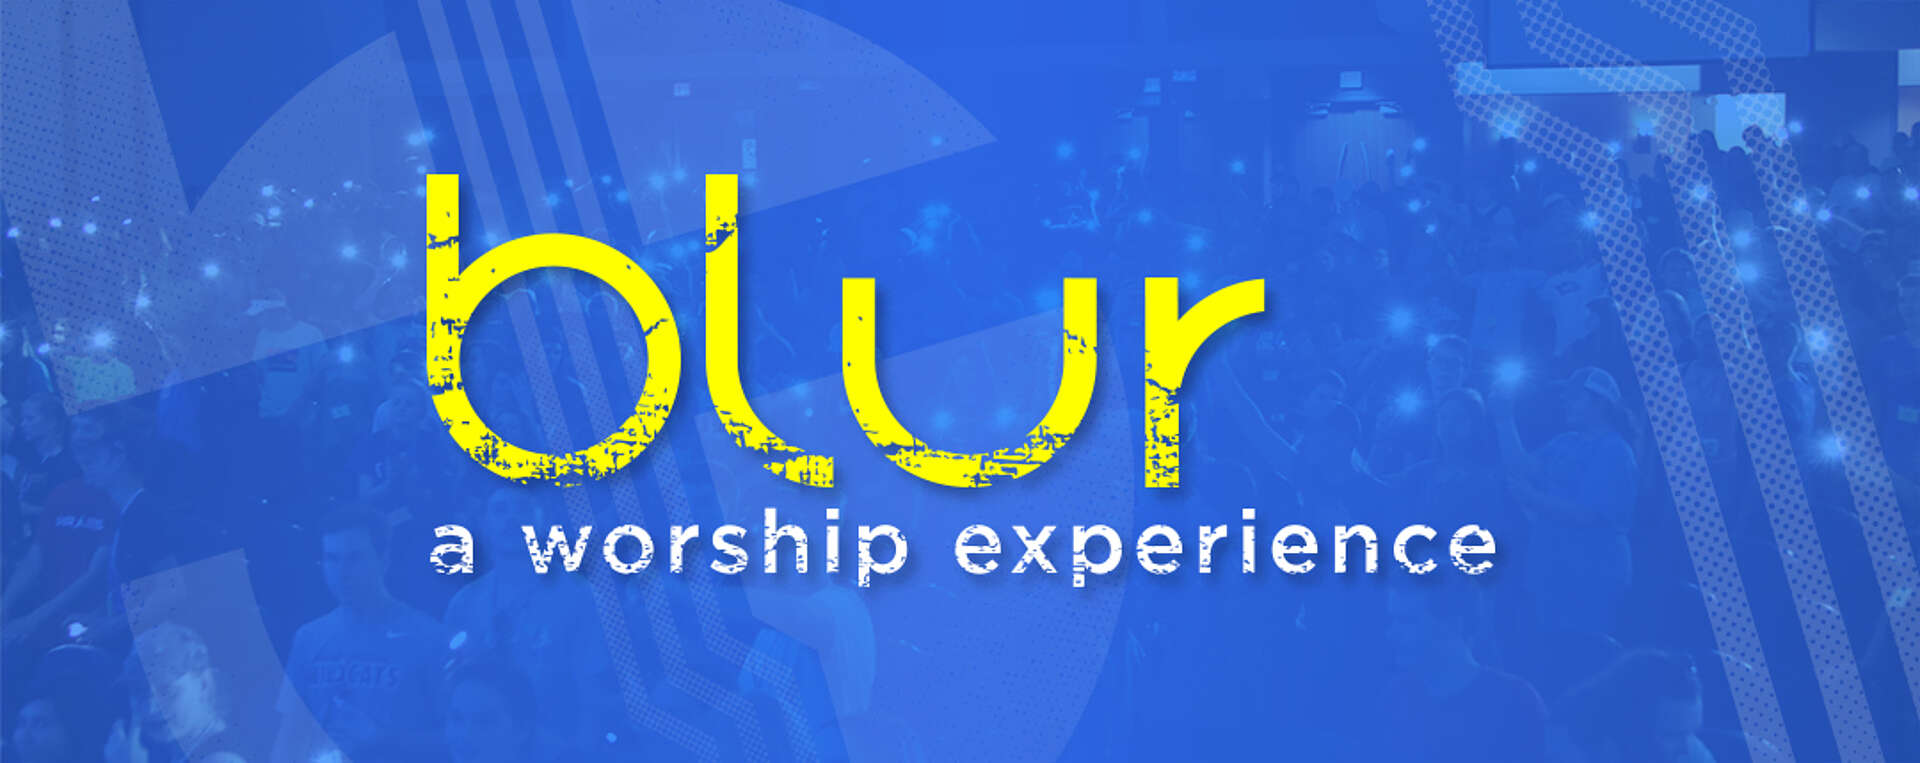 Words Blur a worship experience on blue background